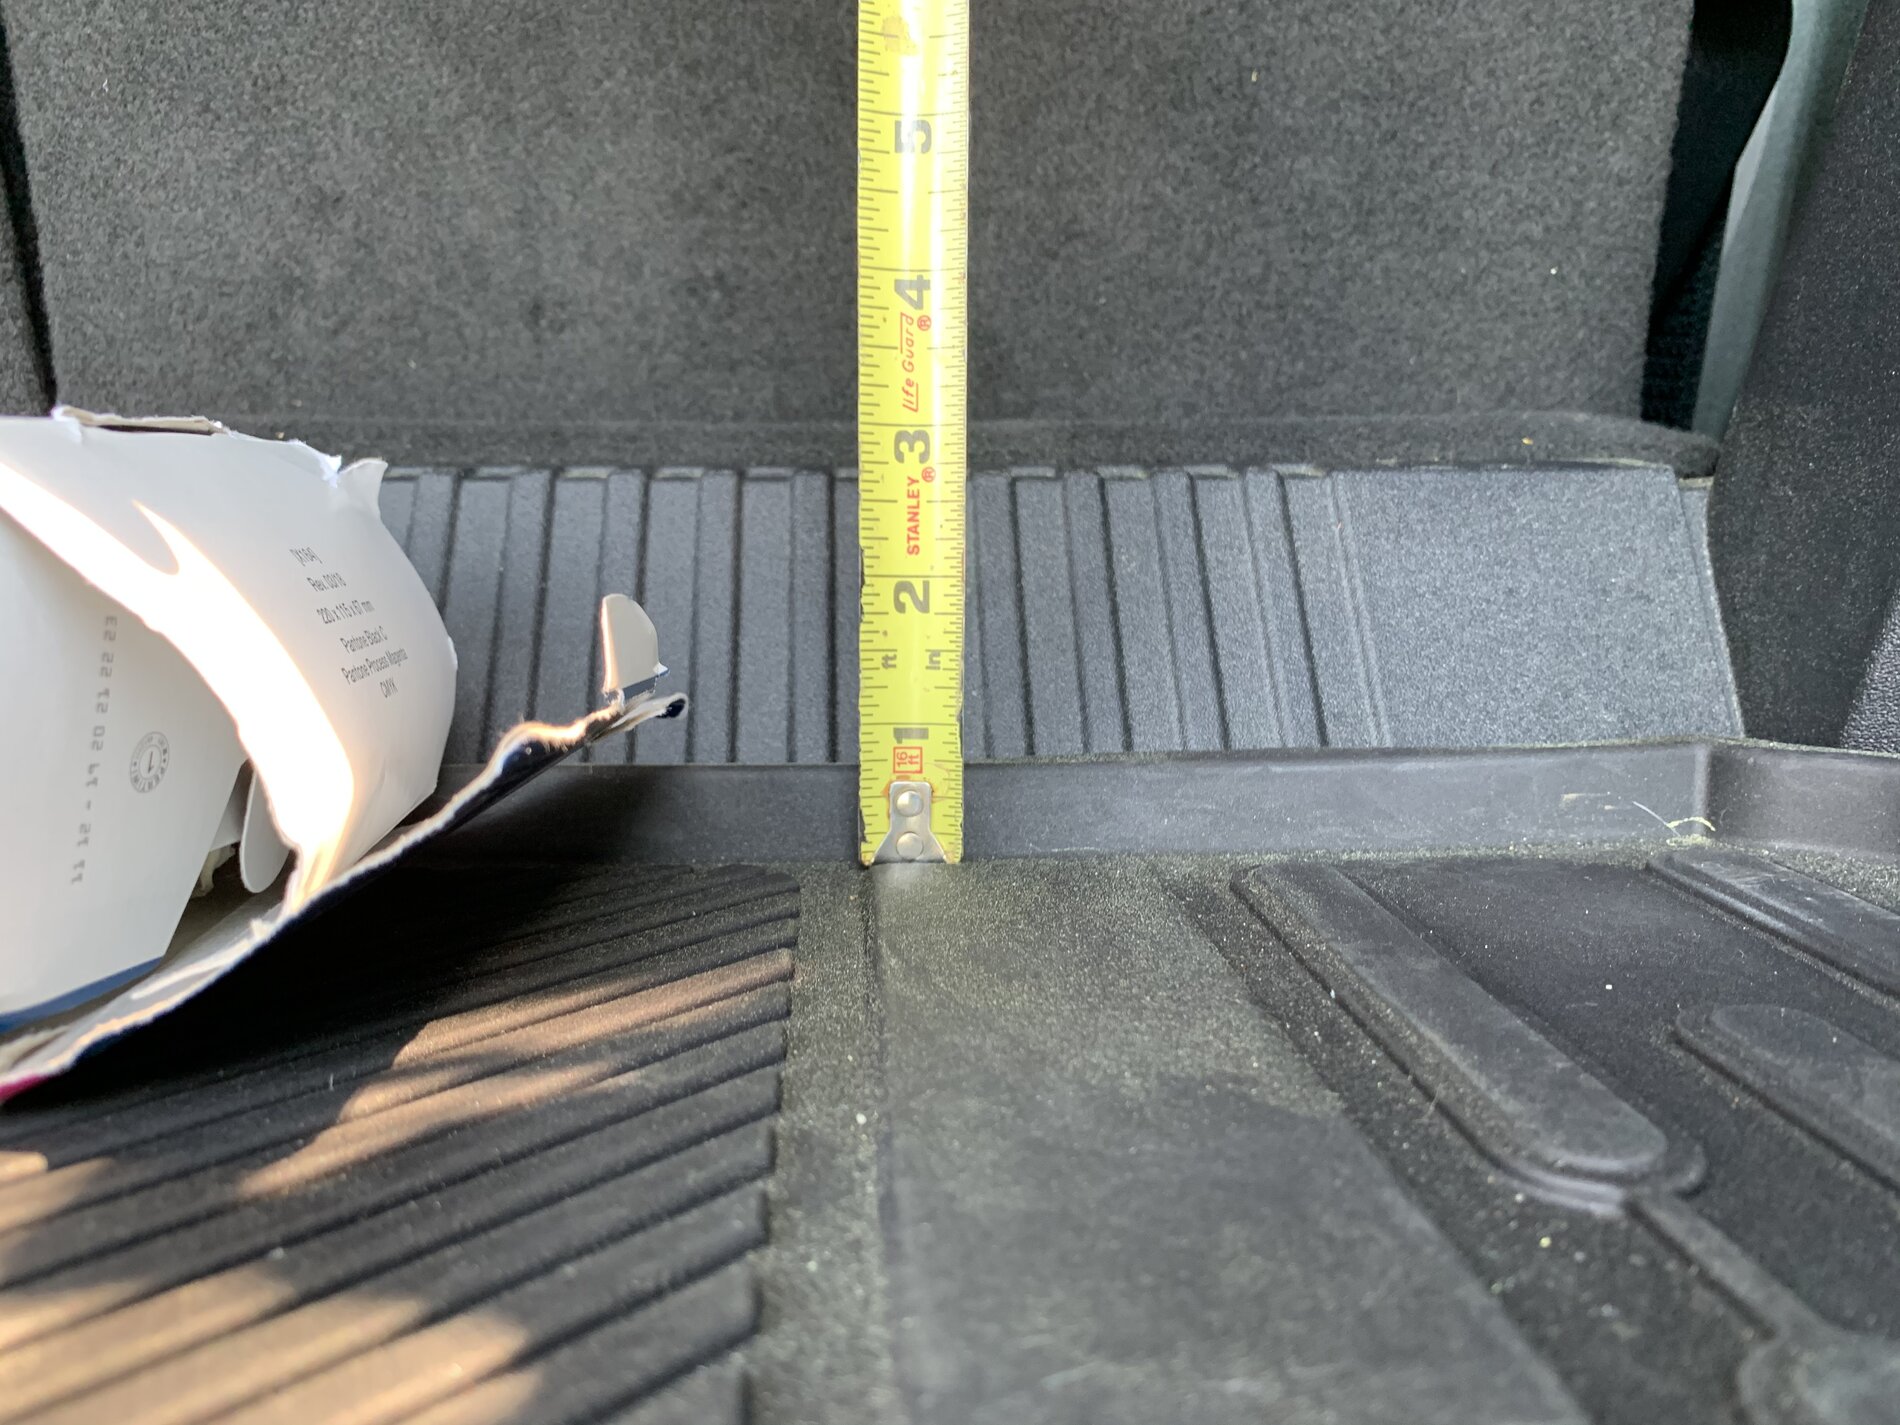 Ford Bronco Visibility / rear view mirror measurements + lots of other pics/observations 34A2B880-D2F8-4DFC-88D1-6ED6E72DC050